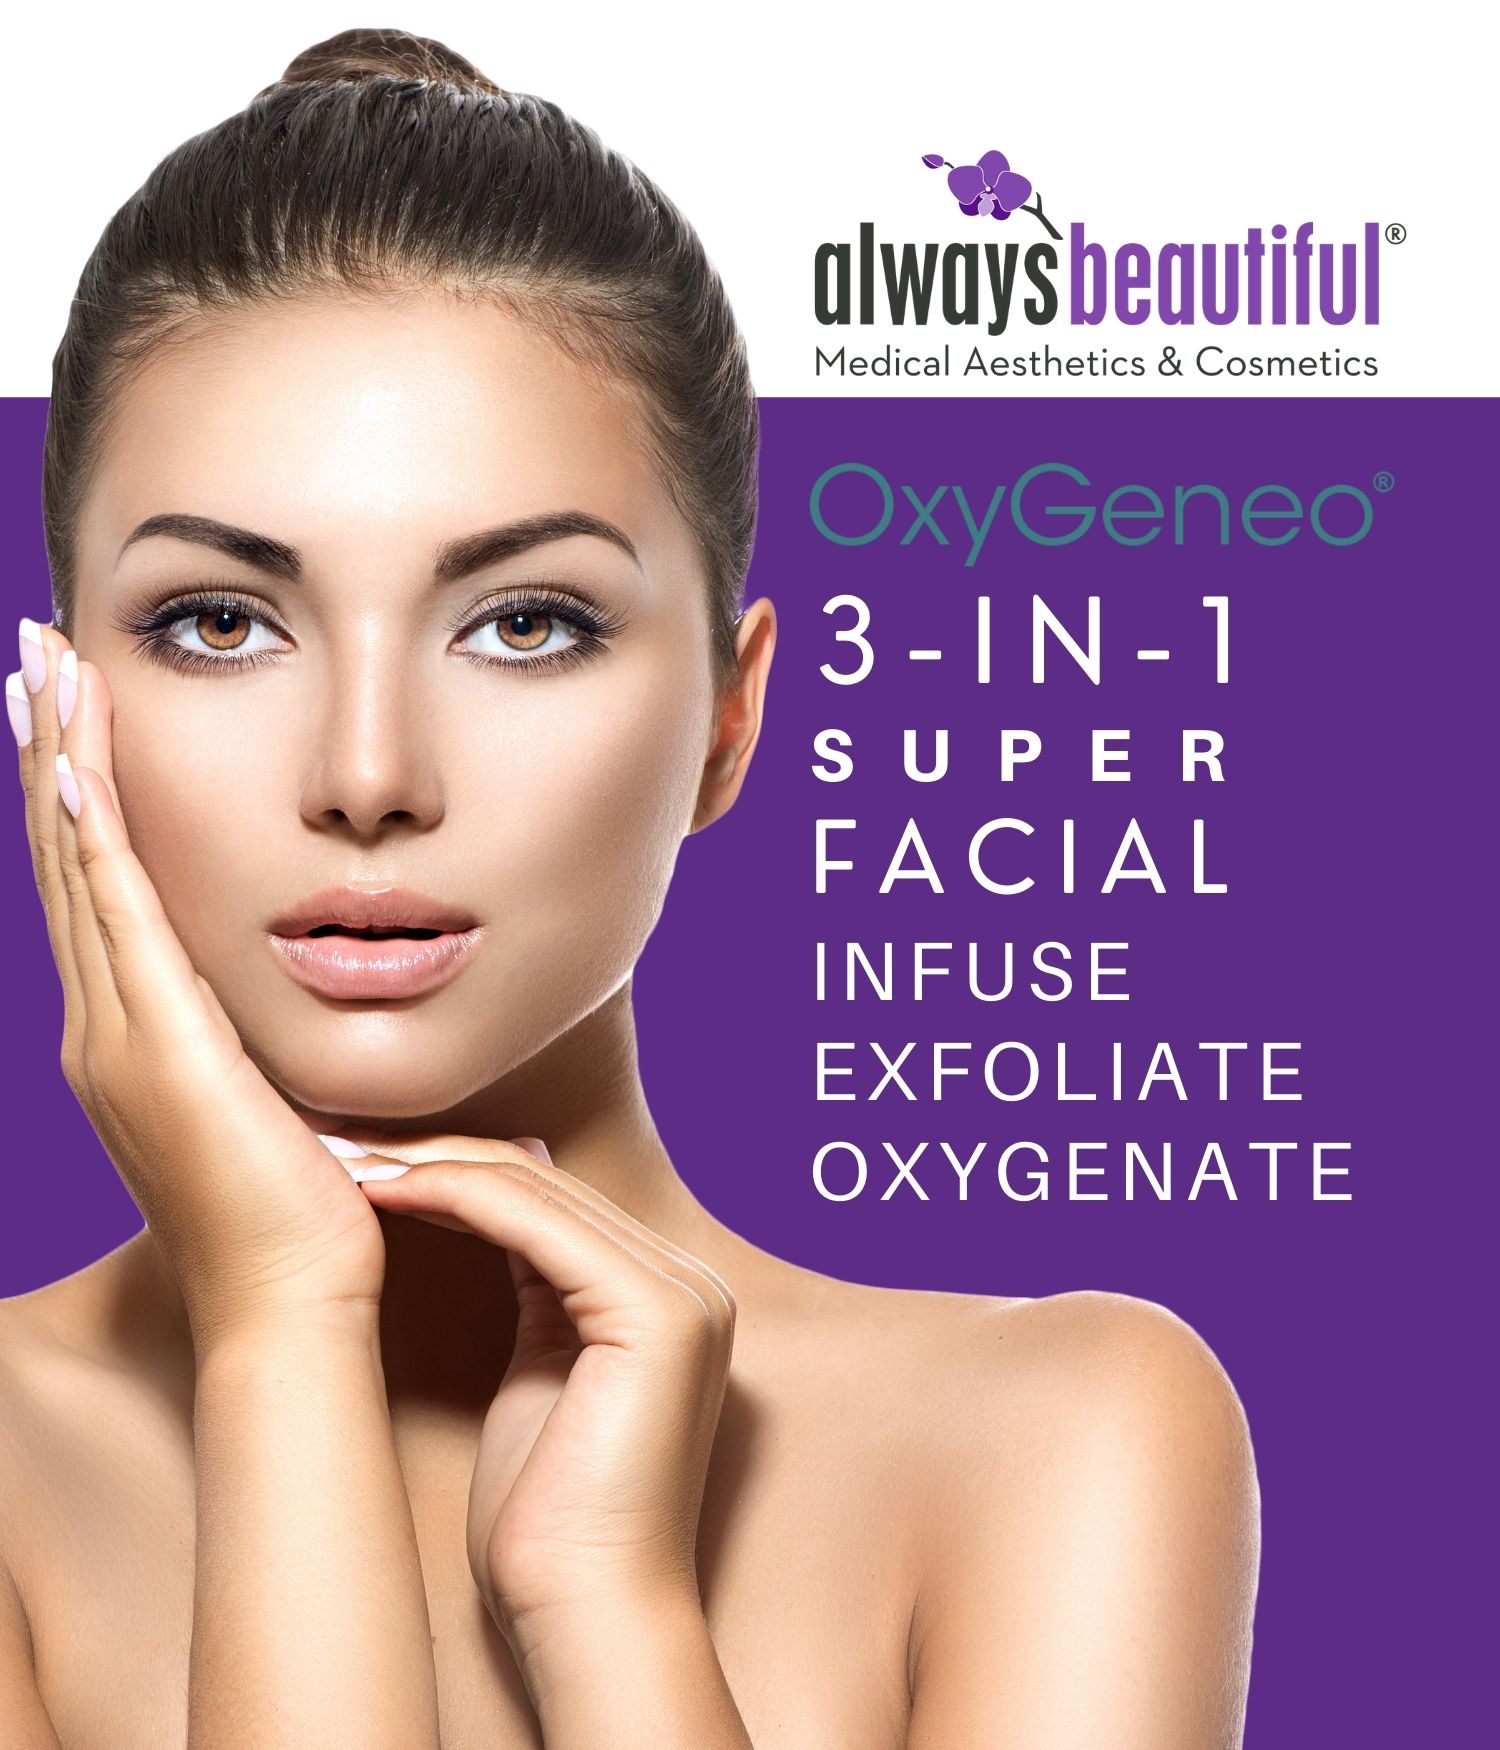 Woman touches her face and smiles after 3-in-1 super facial to infuse, exfoliate, and oxygenate the skin. Treatment done at Always Beautiful.